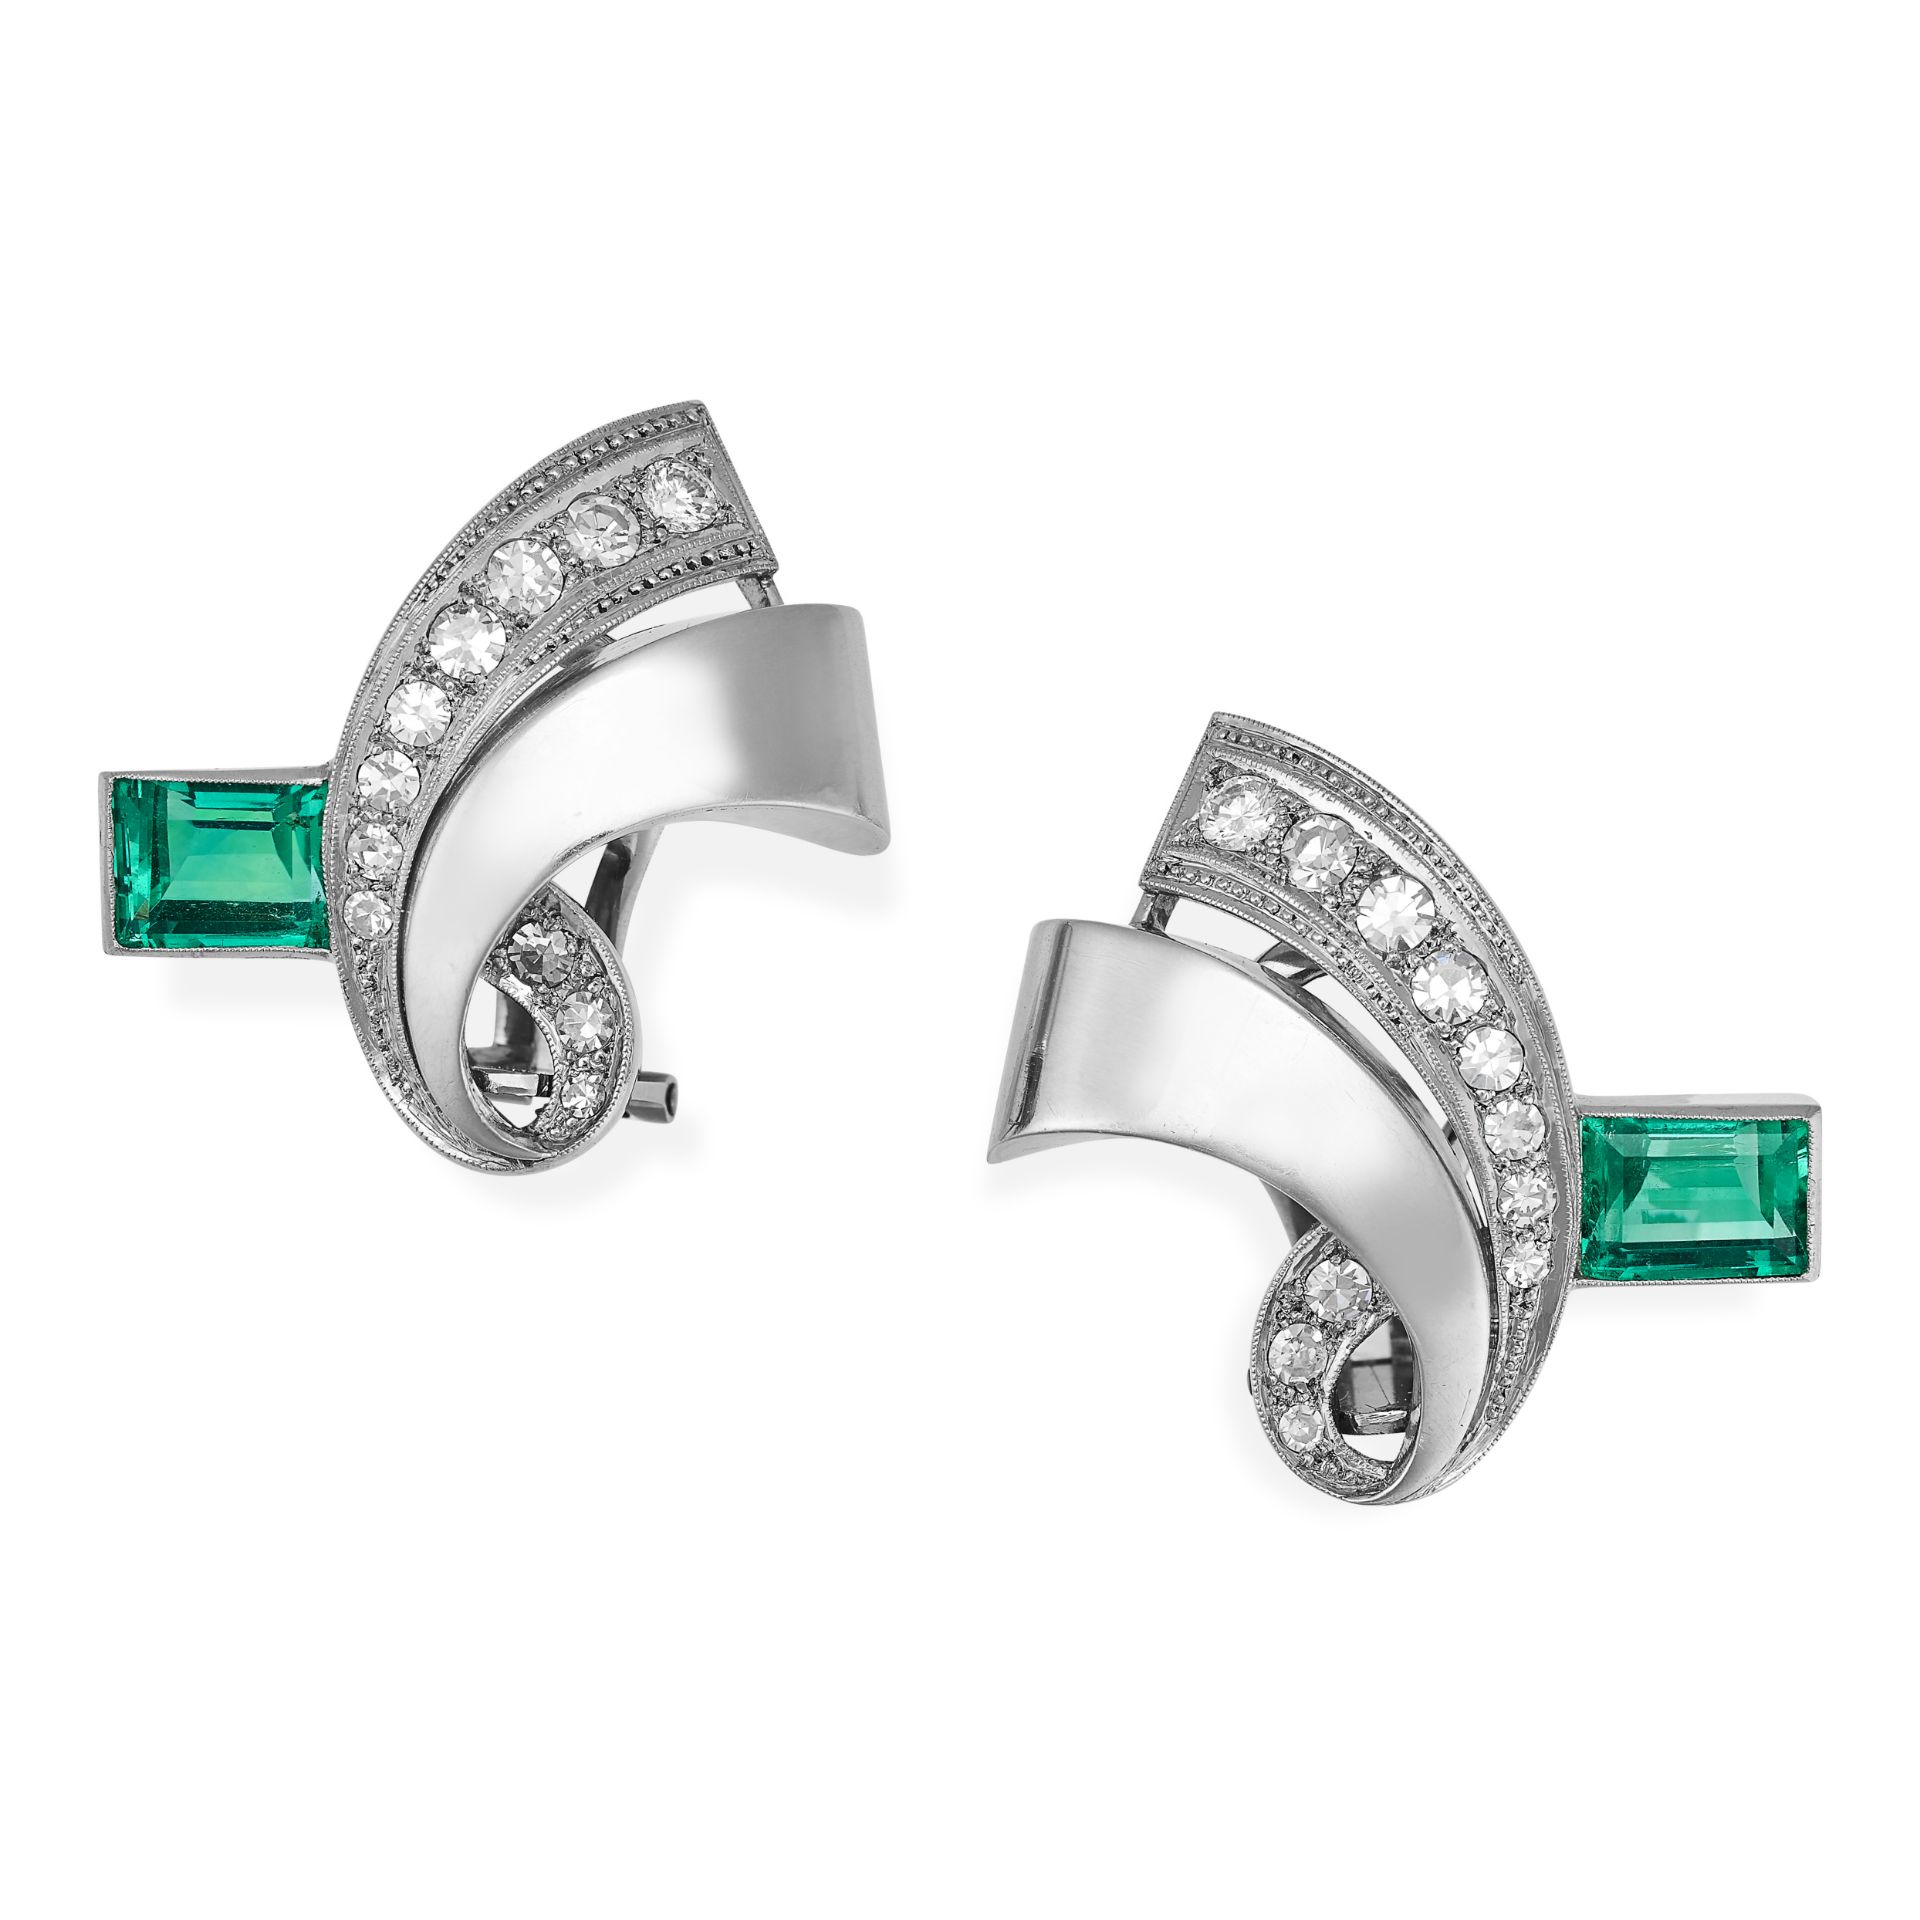 A PAIR OF FINE UNTREATED COLOMBIAN EMERALD AND DIAMOND CLIP EARRINGS in 18ct white gold, in